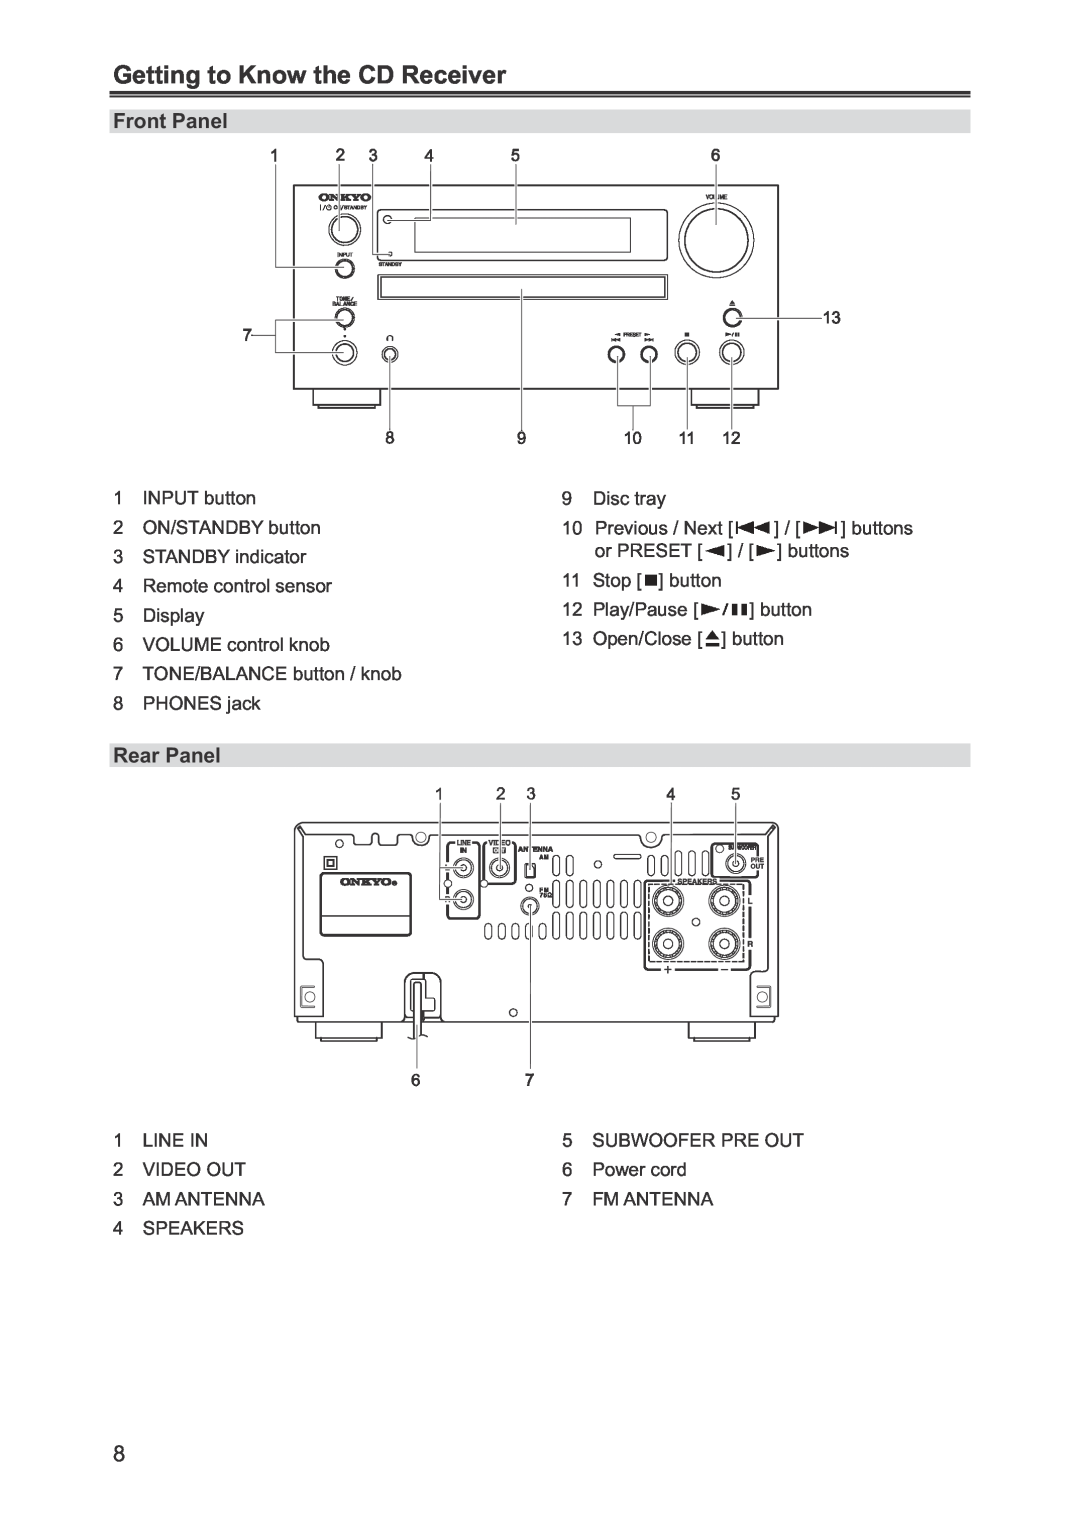 Onkyo CR-445 instruction manual Getting to Know the CD Receiver, Front Panel, Rear Panel 